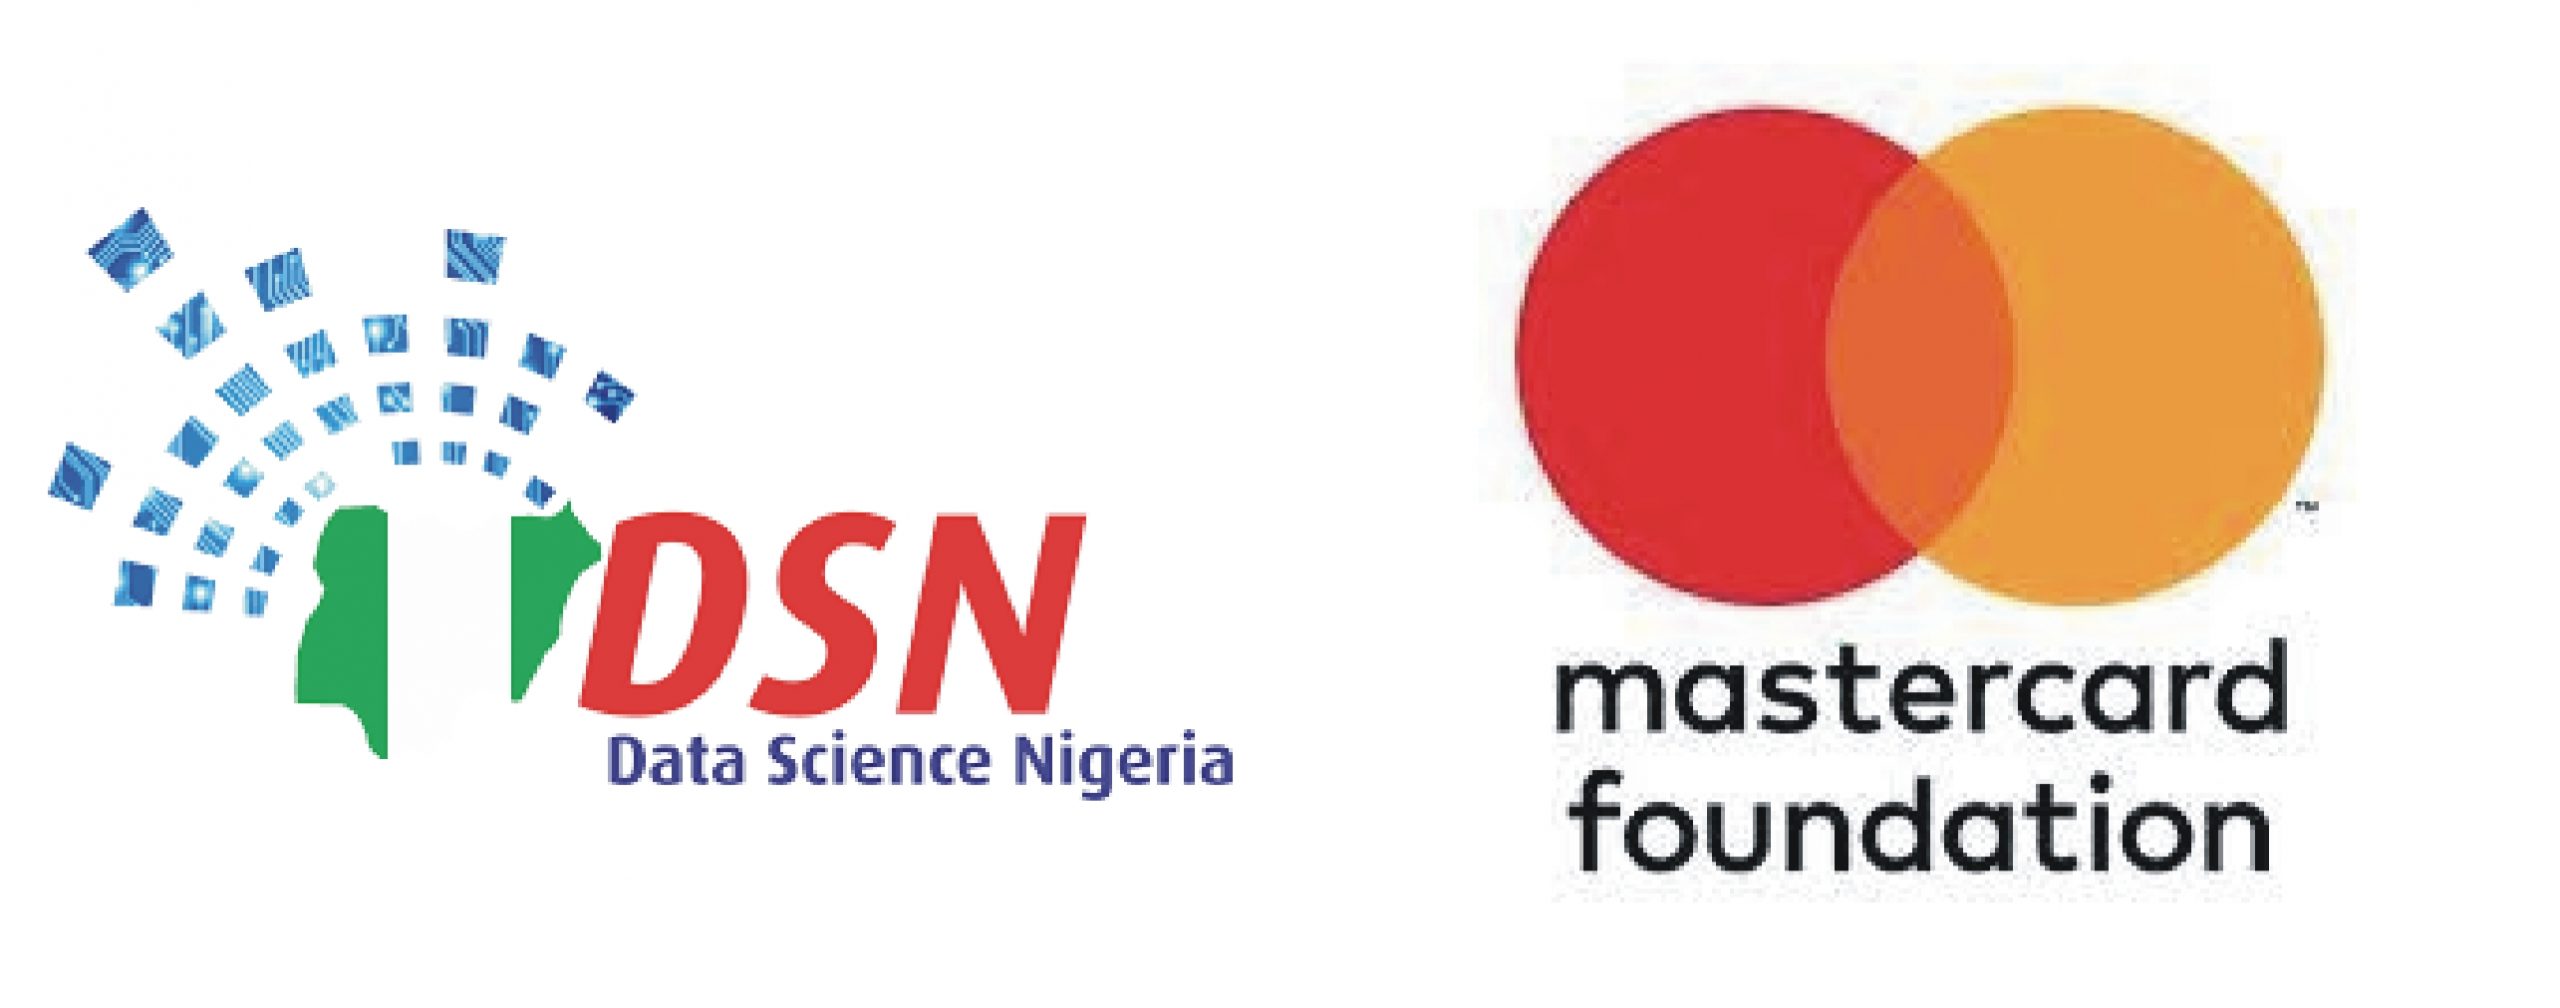 Data Science Nigeria, Mastercard Foundation Launch New E-Learning Platform For More Than 100 Million Young Nigerians-marketingspace.com.ng